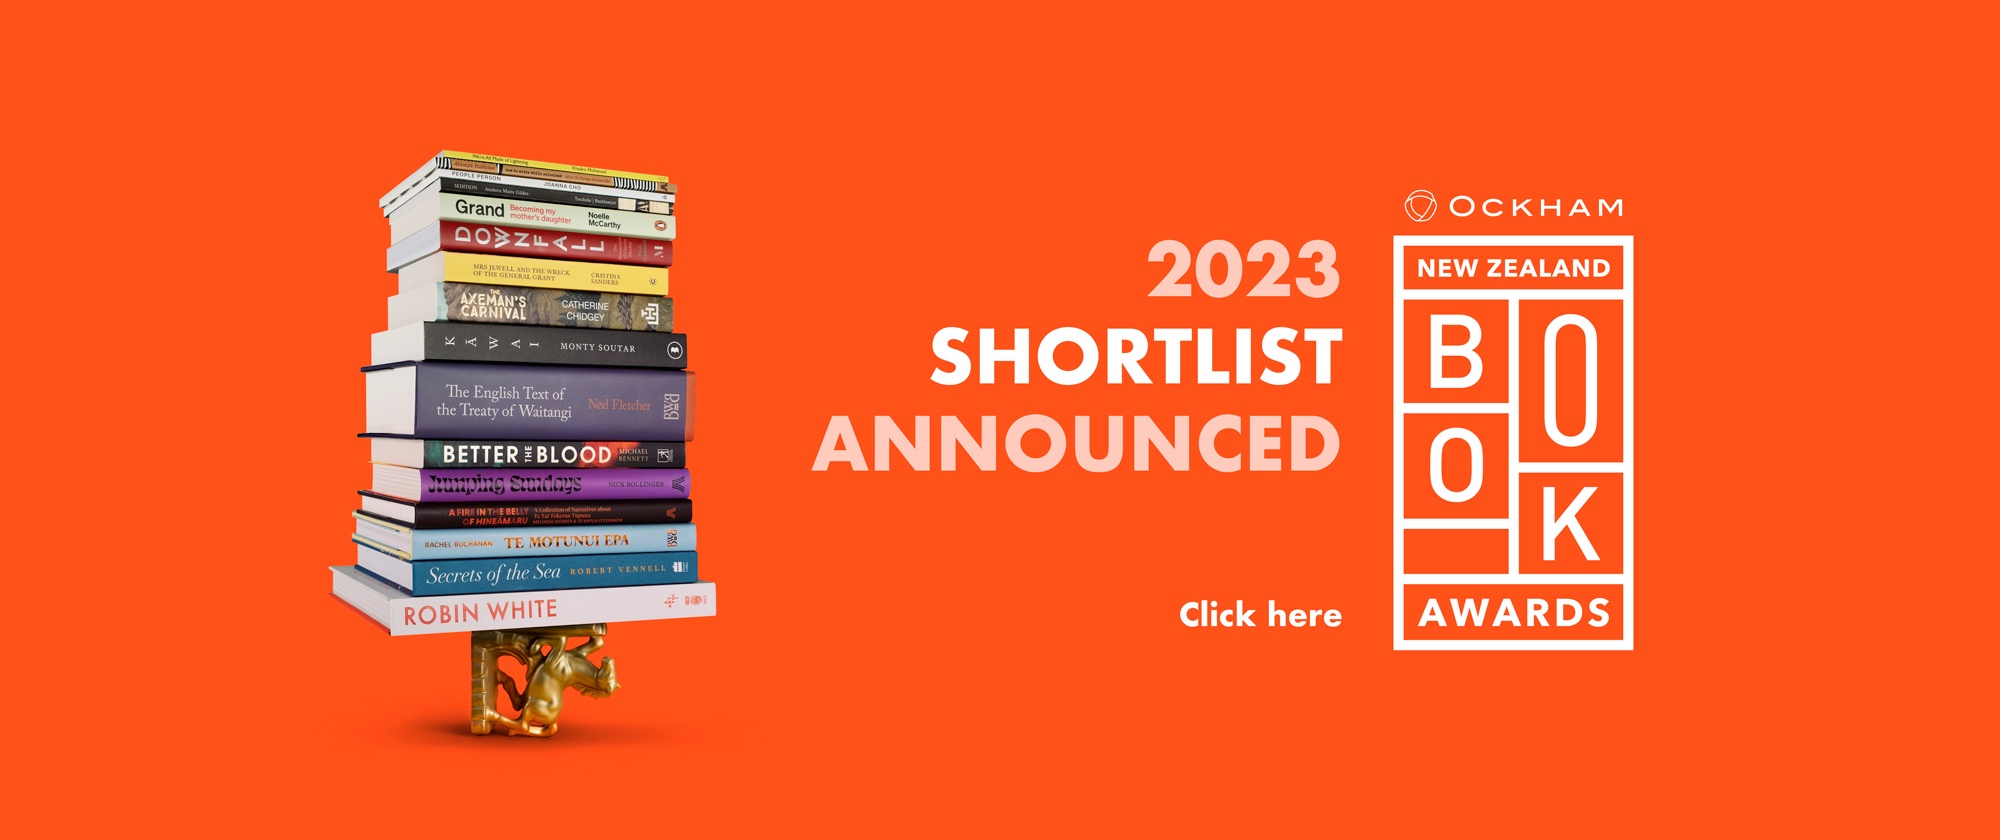 2022 Shortlist announced - Click here